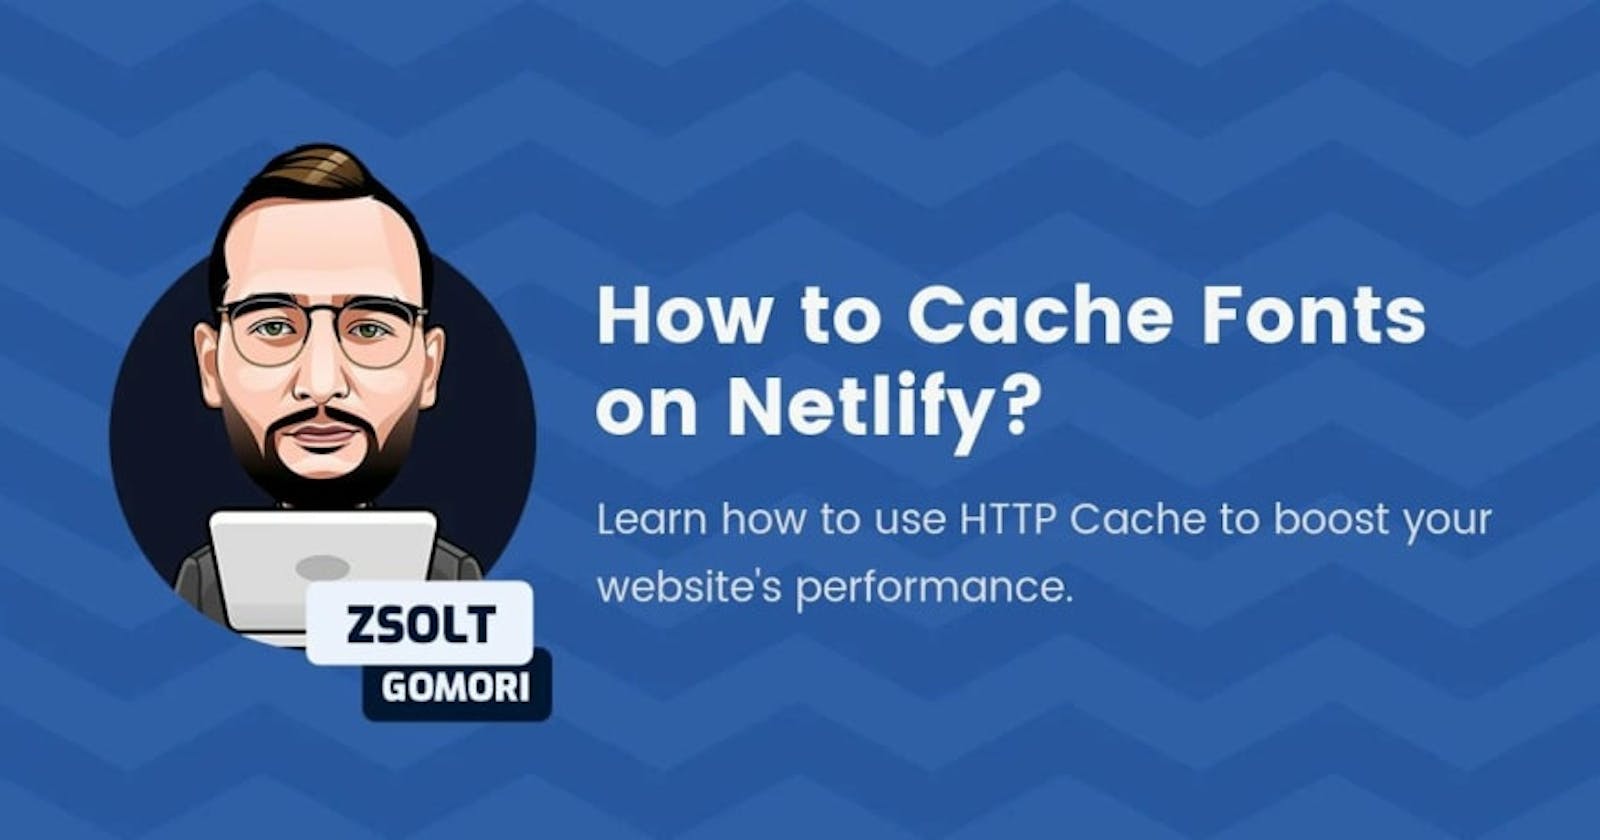 How to Cache Fonts on Netlify?